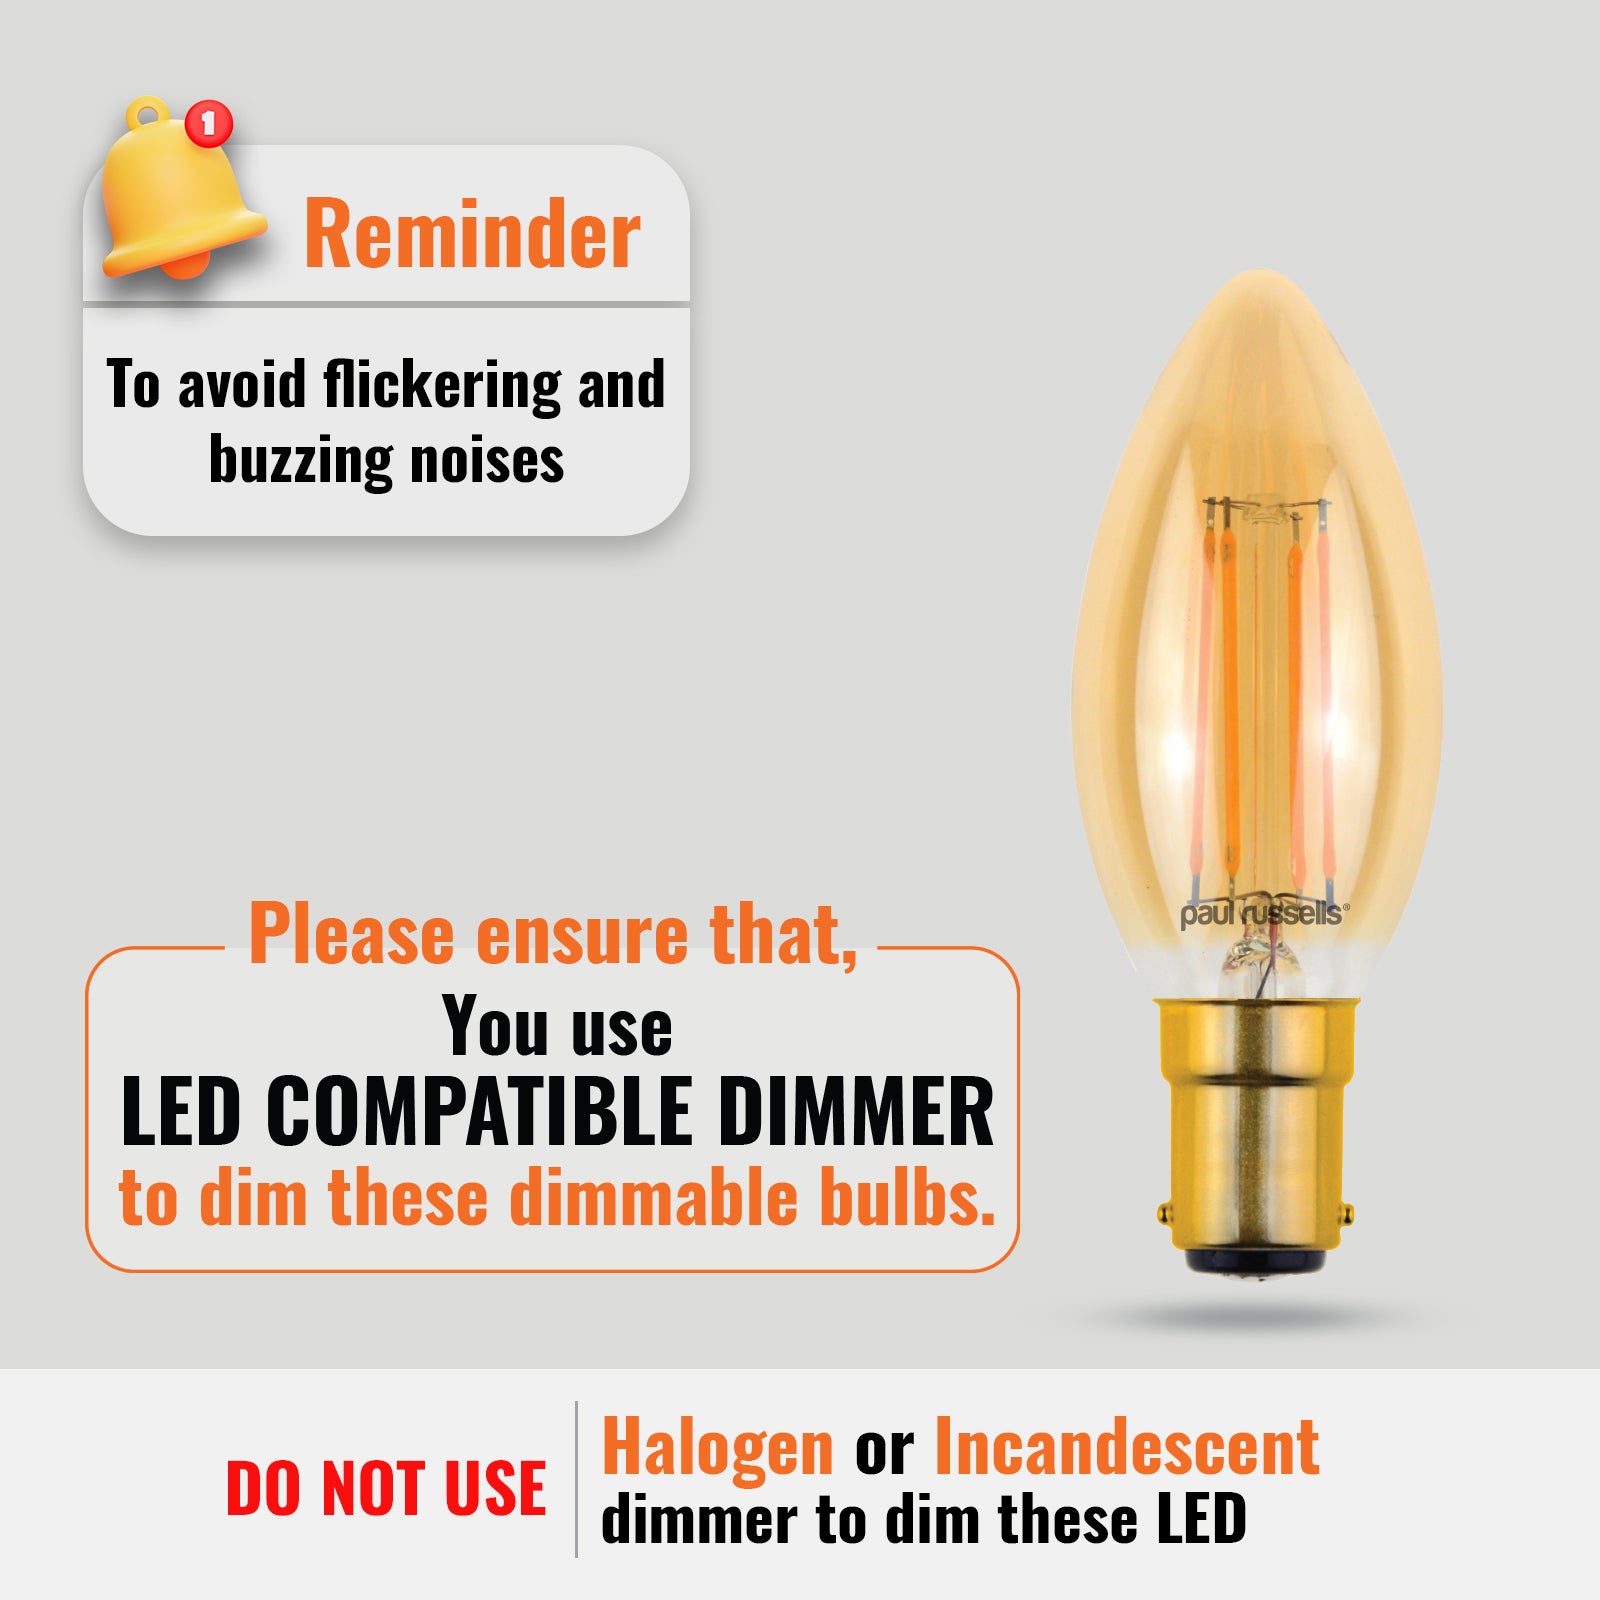 LED Dimmable Filament Candle 4.5W (40w), SBC/B15, 423 Lumens, Extra Warm White(2200K), 240V